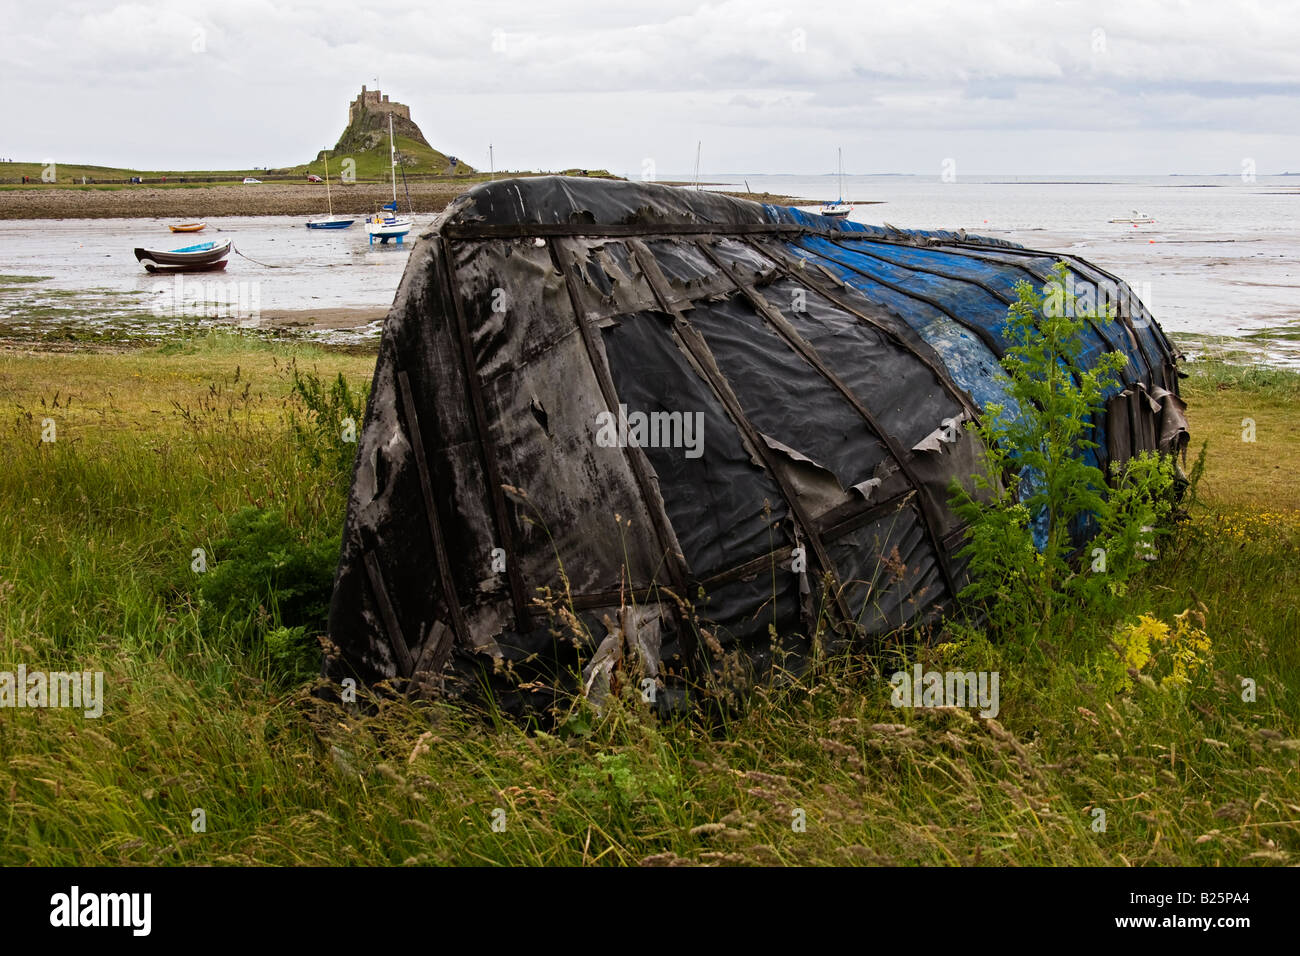 Wrecked wooden boat at shore of Holy Island in England. Stock Photo